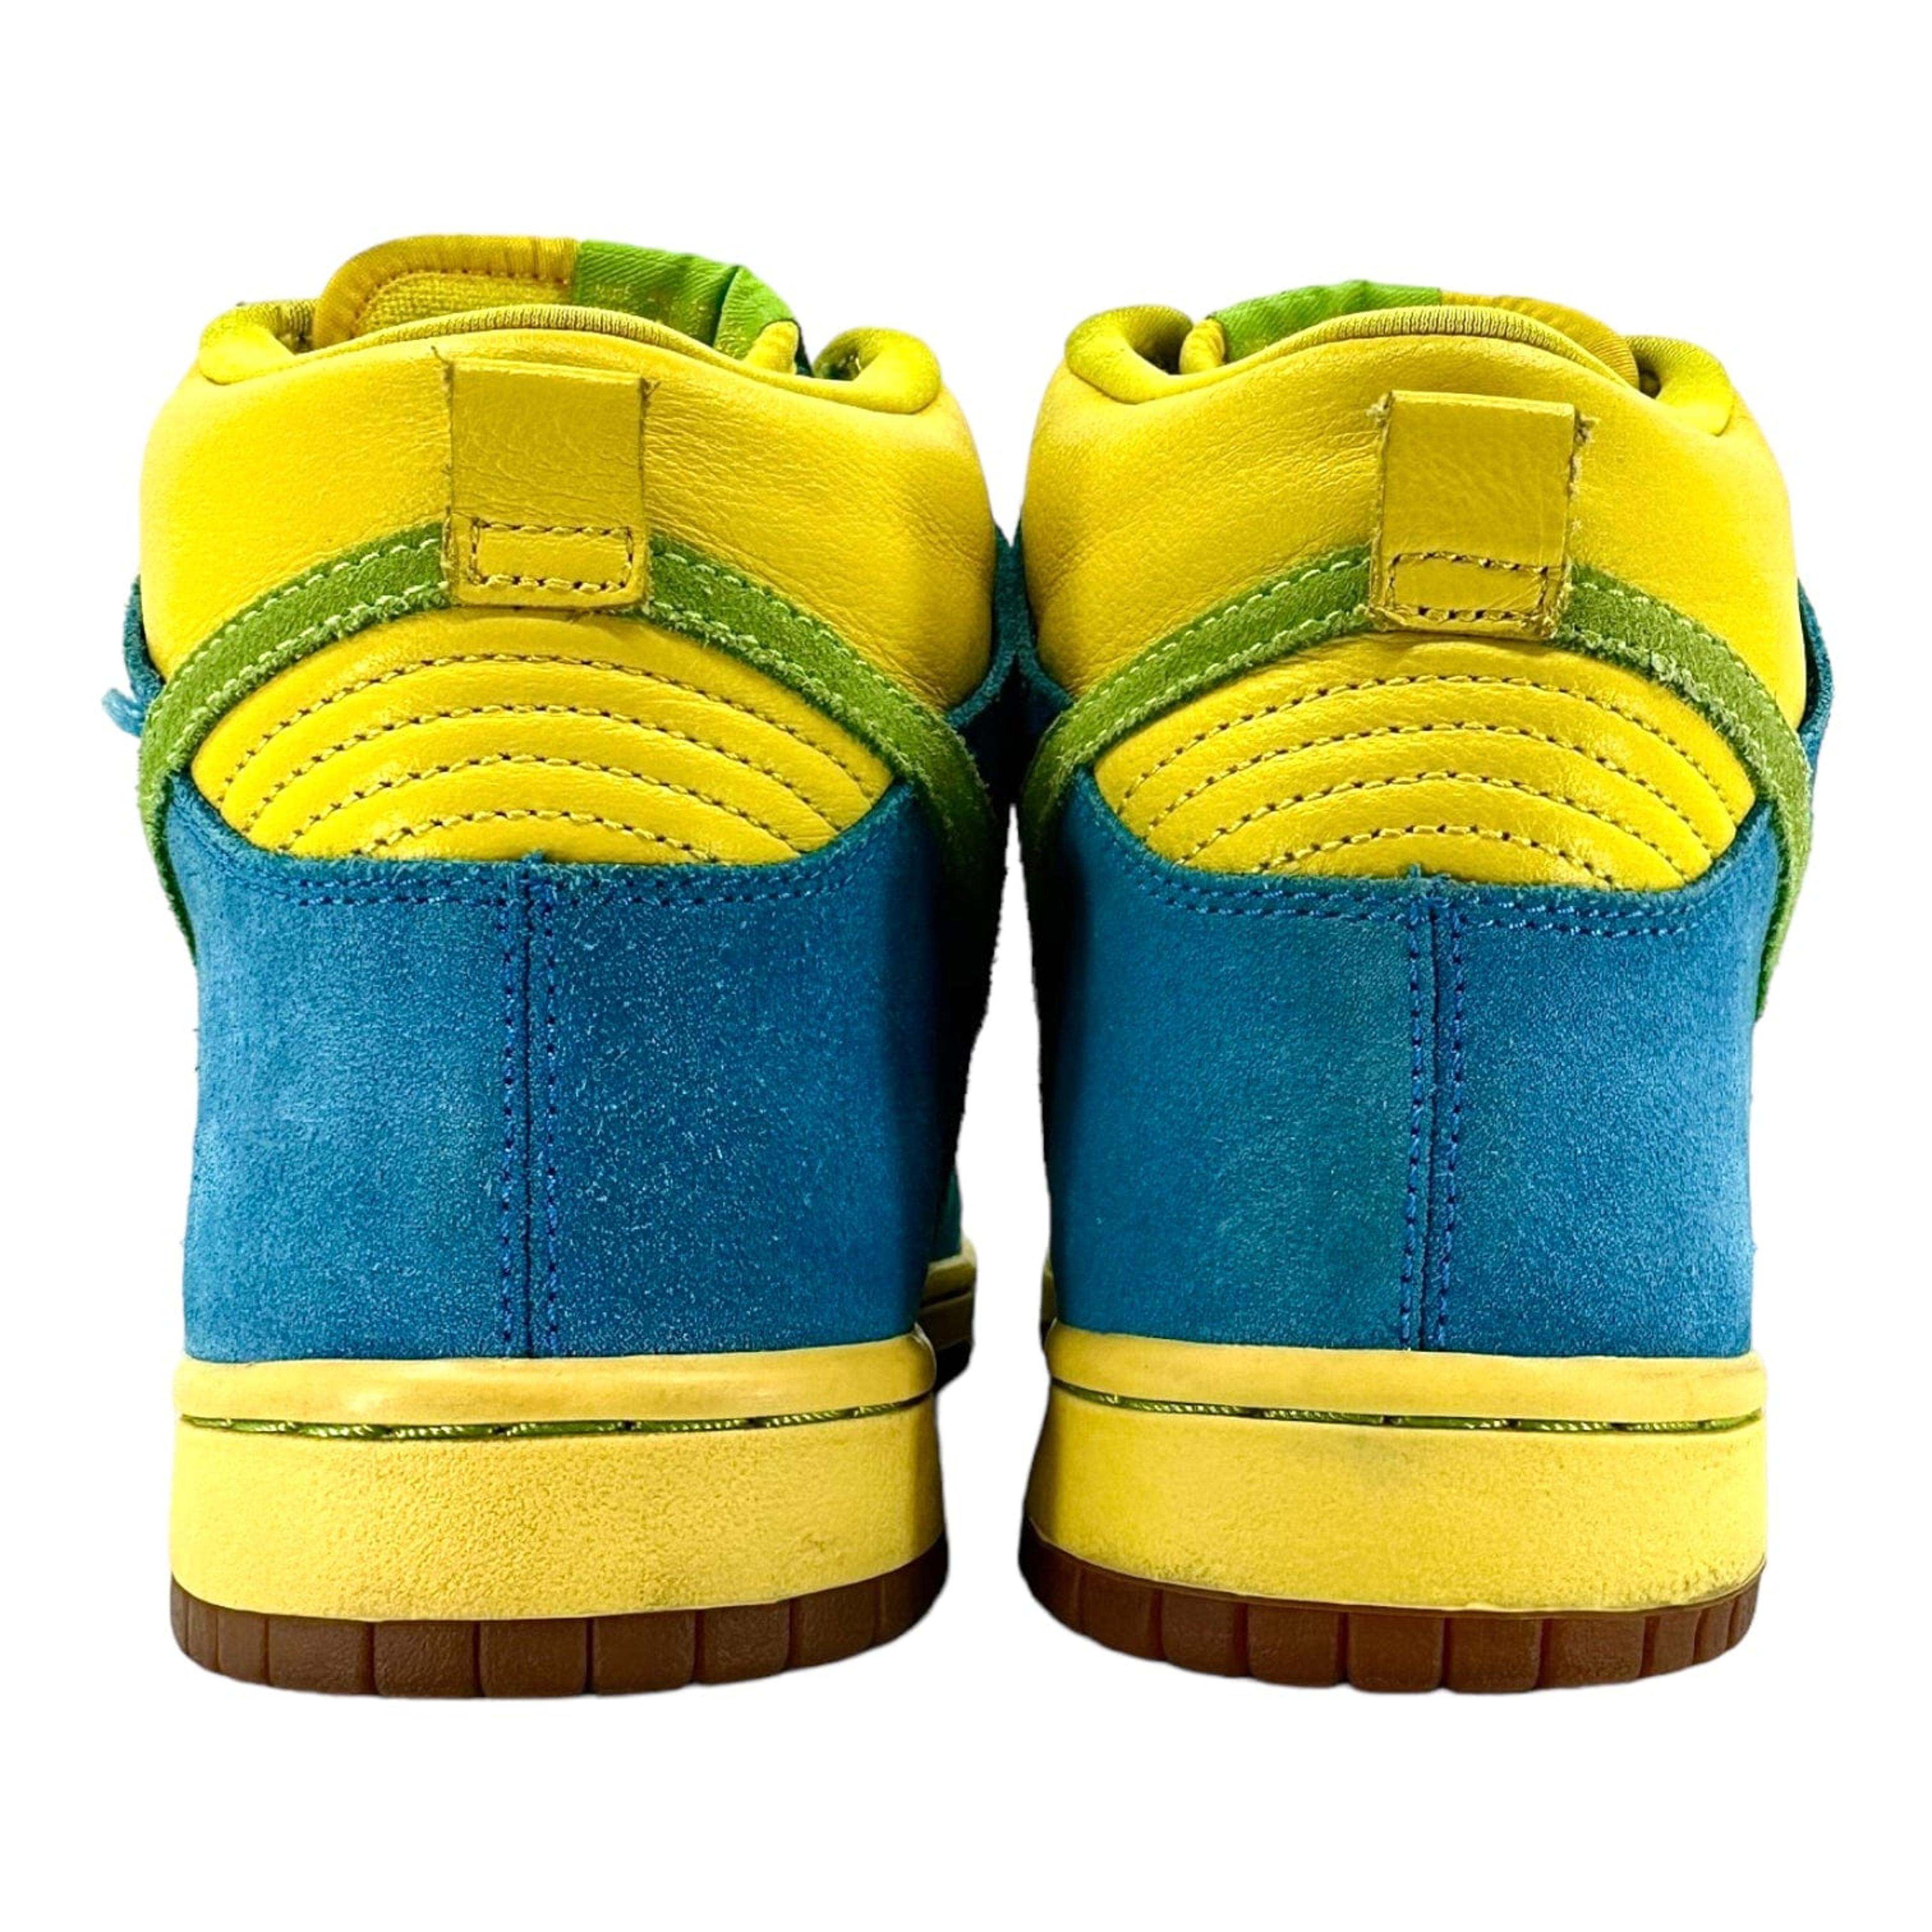 Alternate View 5 of Nike SB Dunk High Marge Simpson Pre-Owned